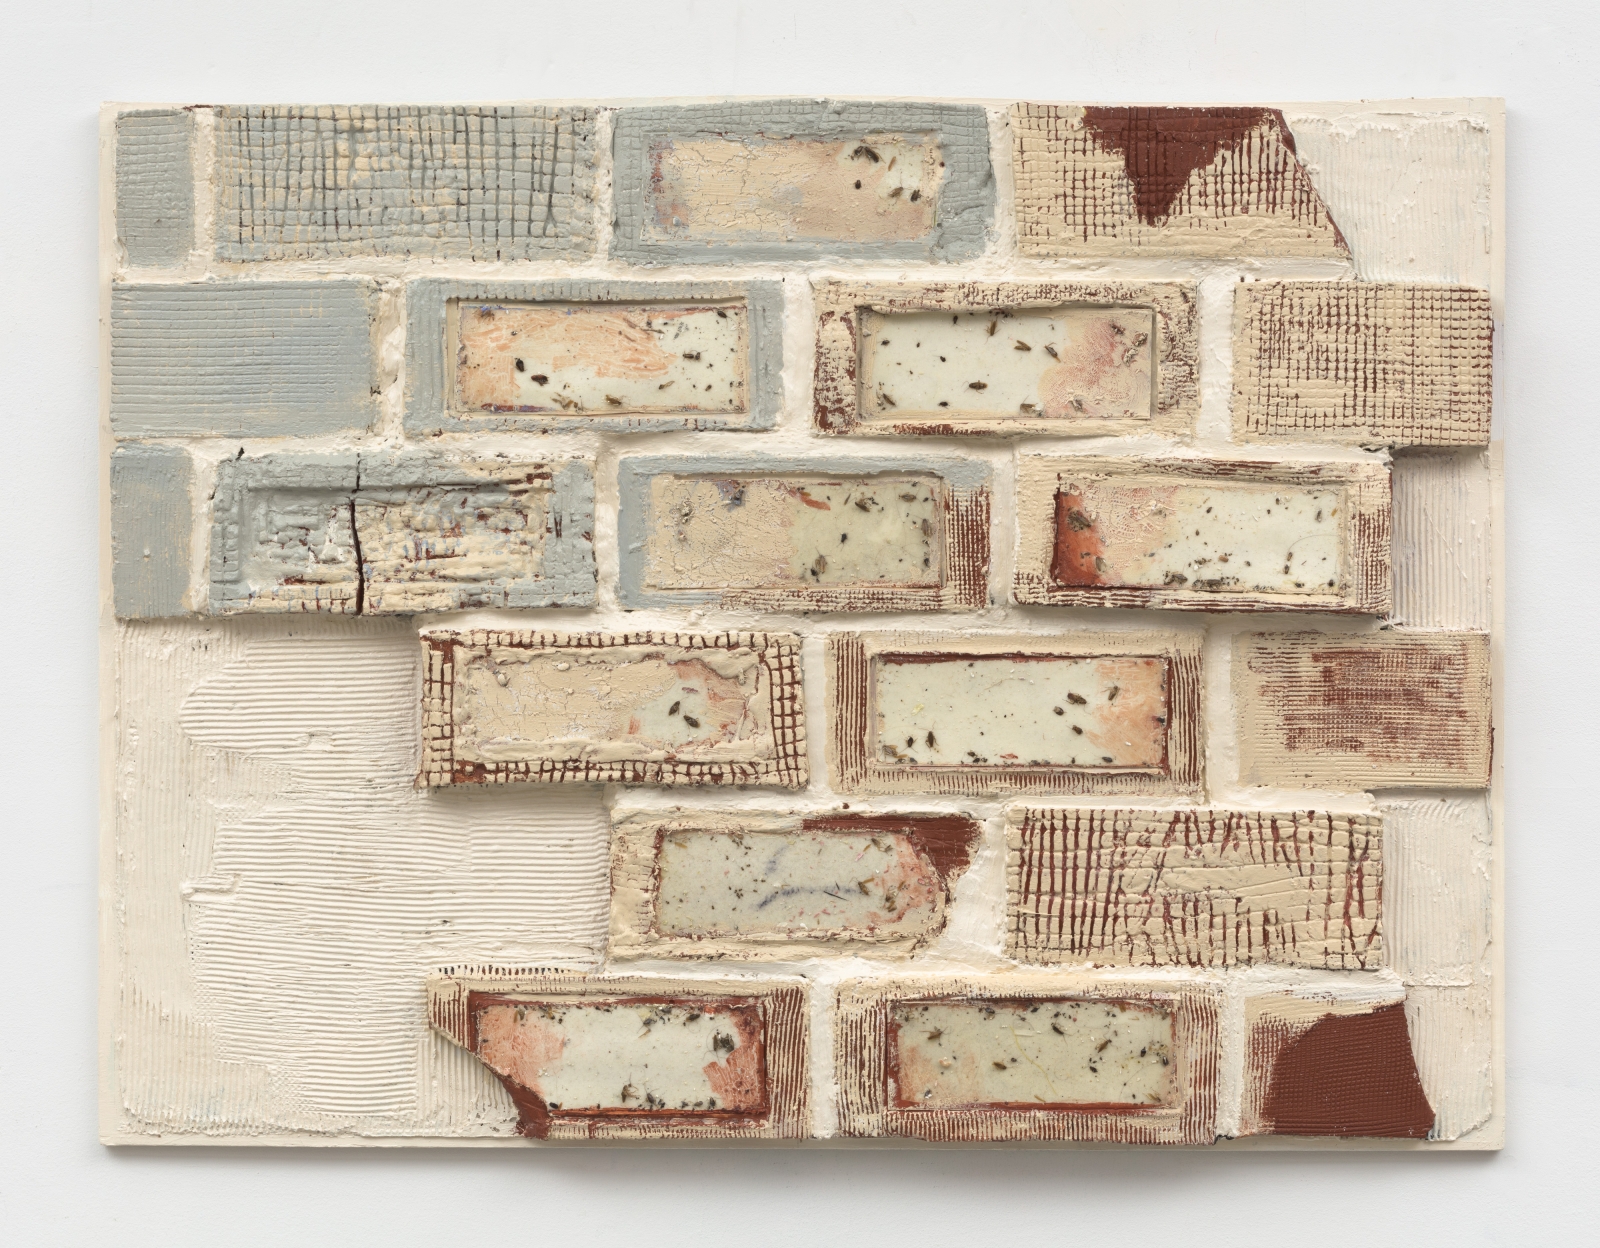 Caroline Boreri
Roommates, 2022
wooden board, plaster, acrylic, glue traps, late bugs of 86 Madison St, tile adhesive, grout
30 x 40 x 2 1/2 ins.
76.2 x 101.6 x 6.3 cm